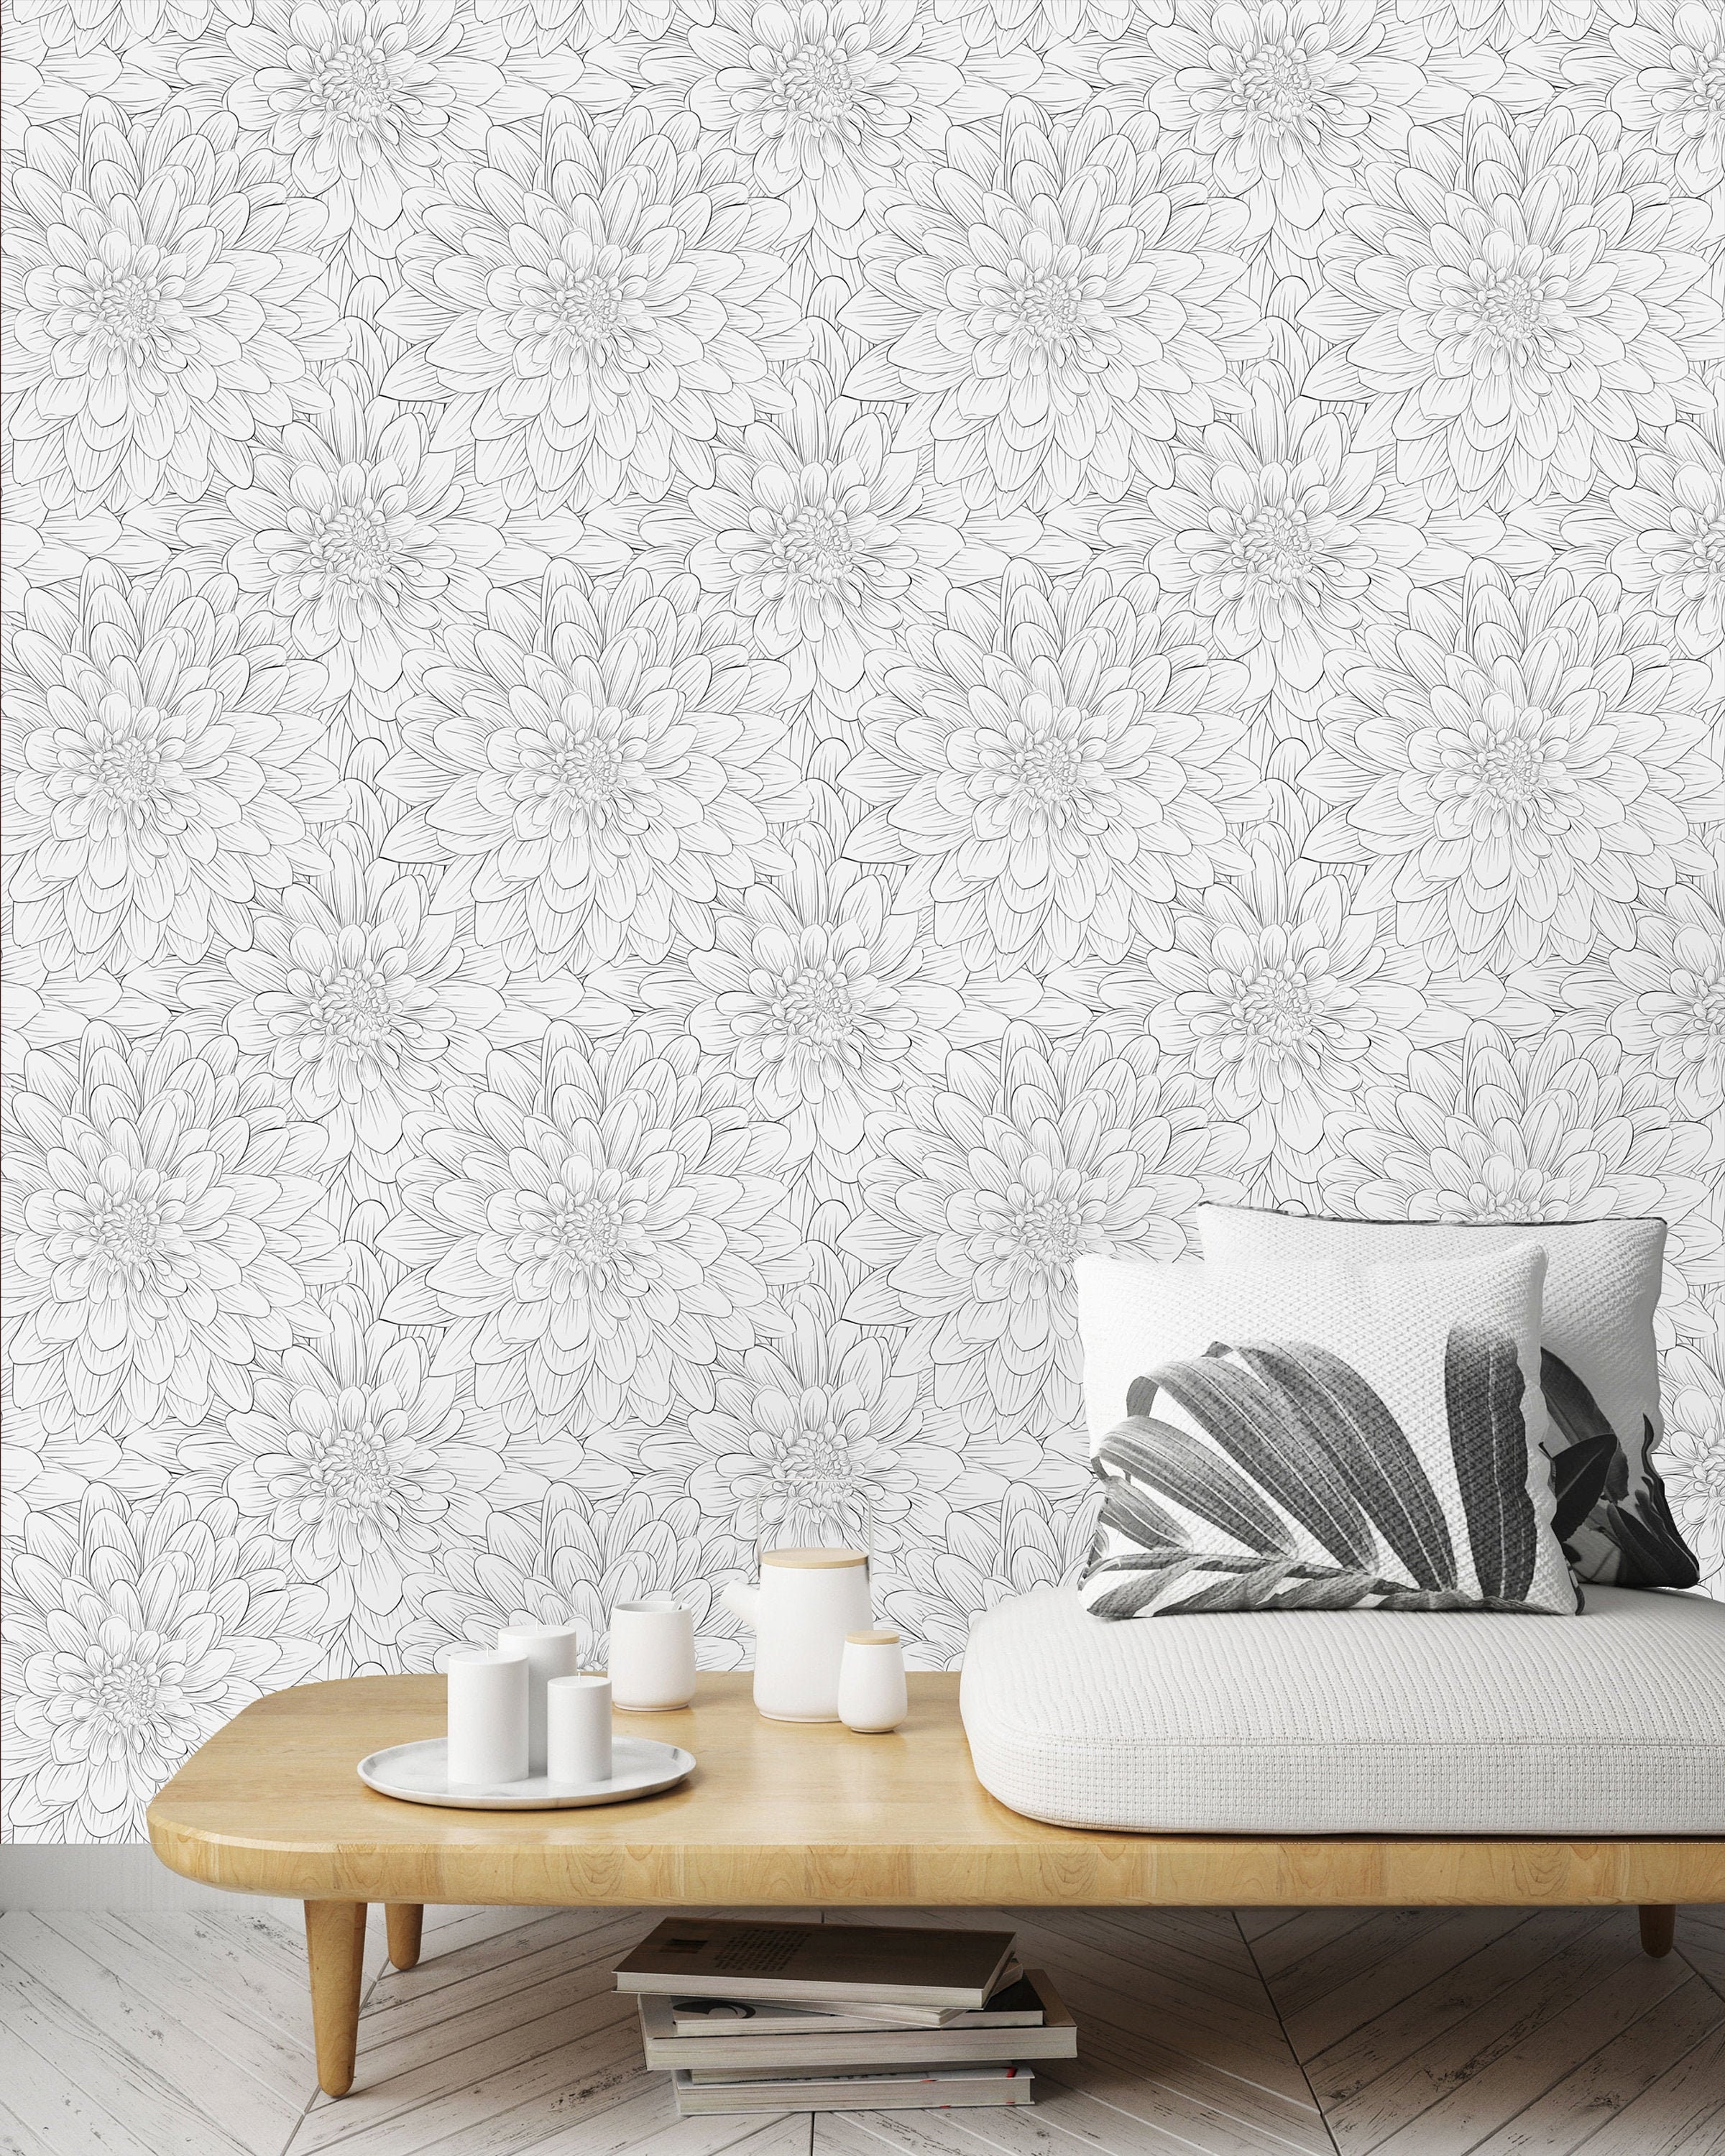 Light Field Flower Removable Peel and Stick Wallpaper 25in W x 18.75ft H - Roll